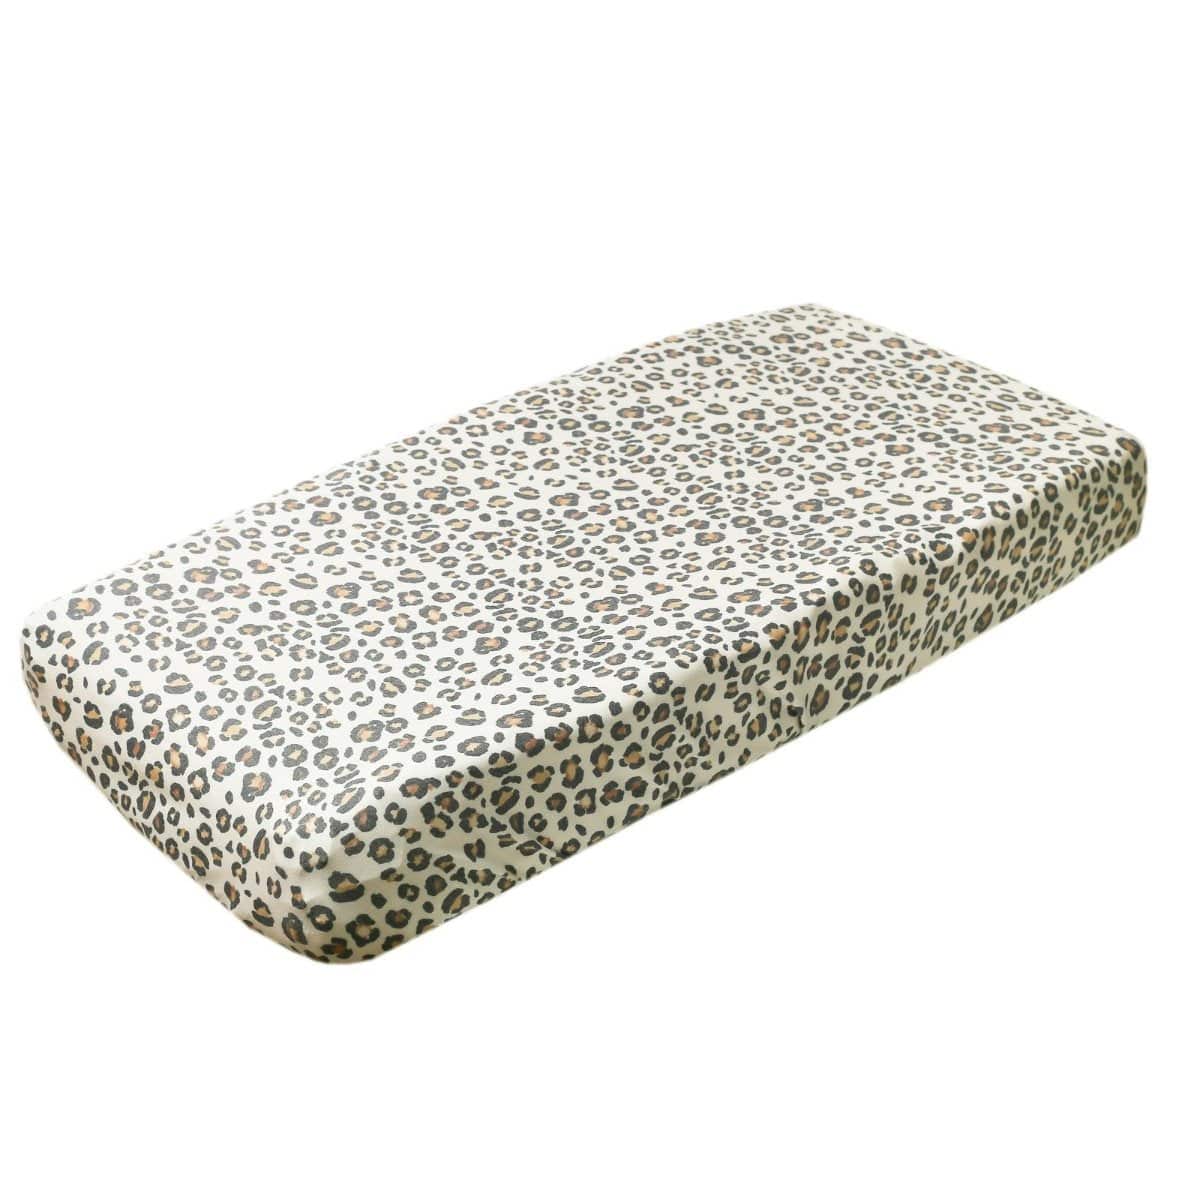 Zara Premium Knit Changing Pad Cover - Twinkle Twinkle Little One